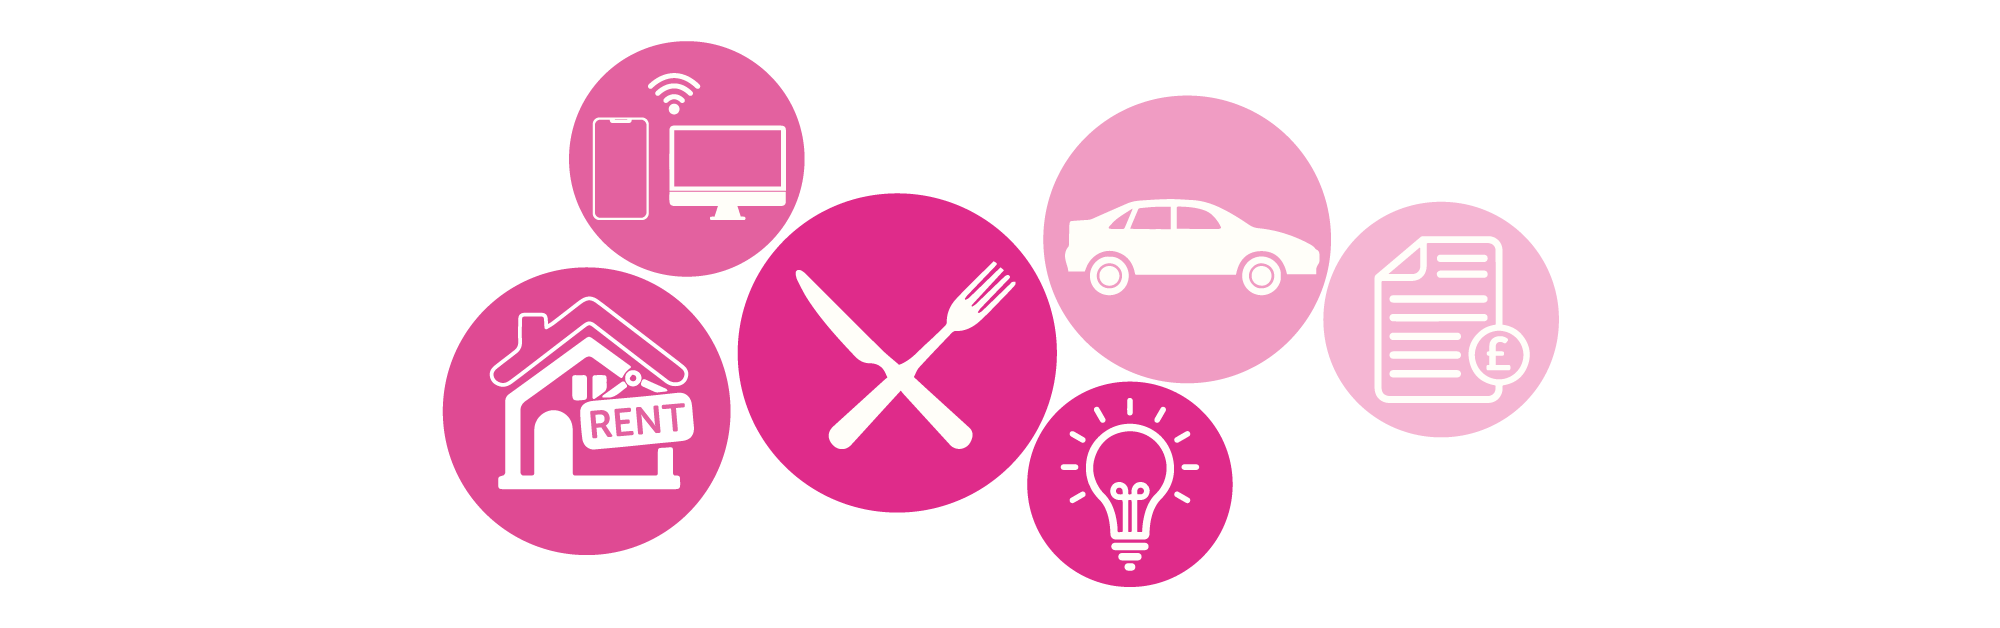 six circles containing icons of different expenses such as a car, a rented house, broadband